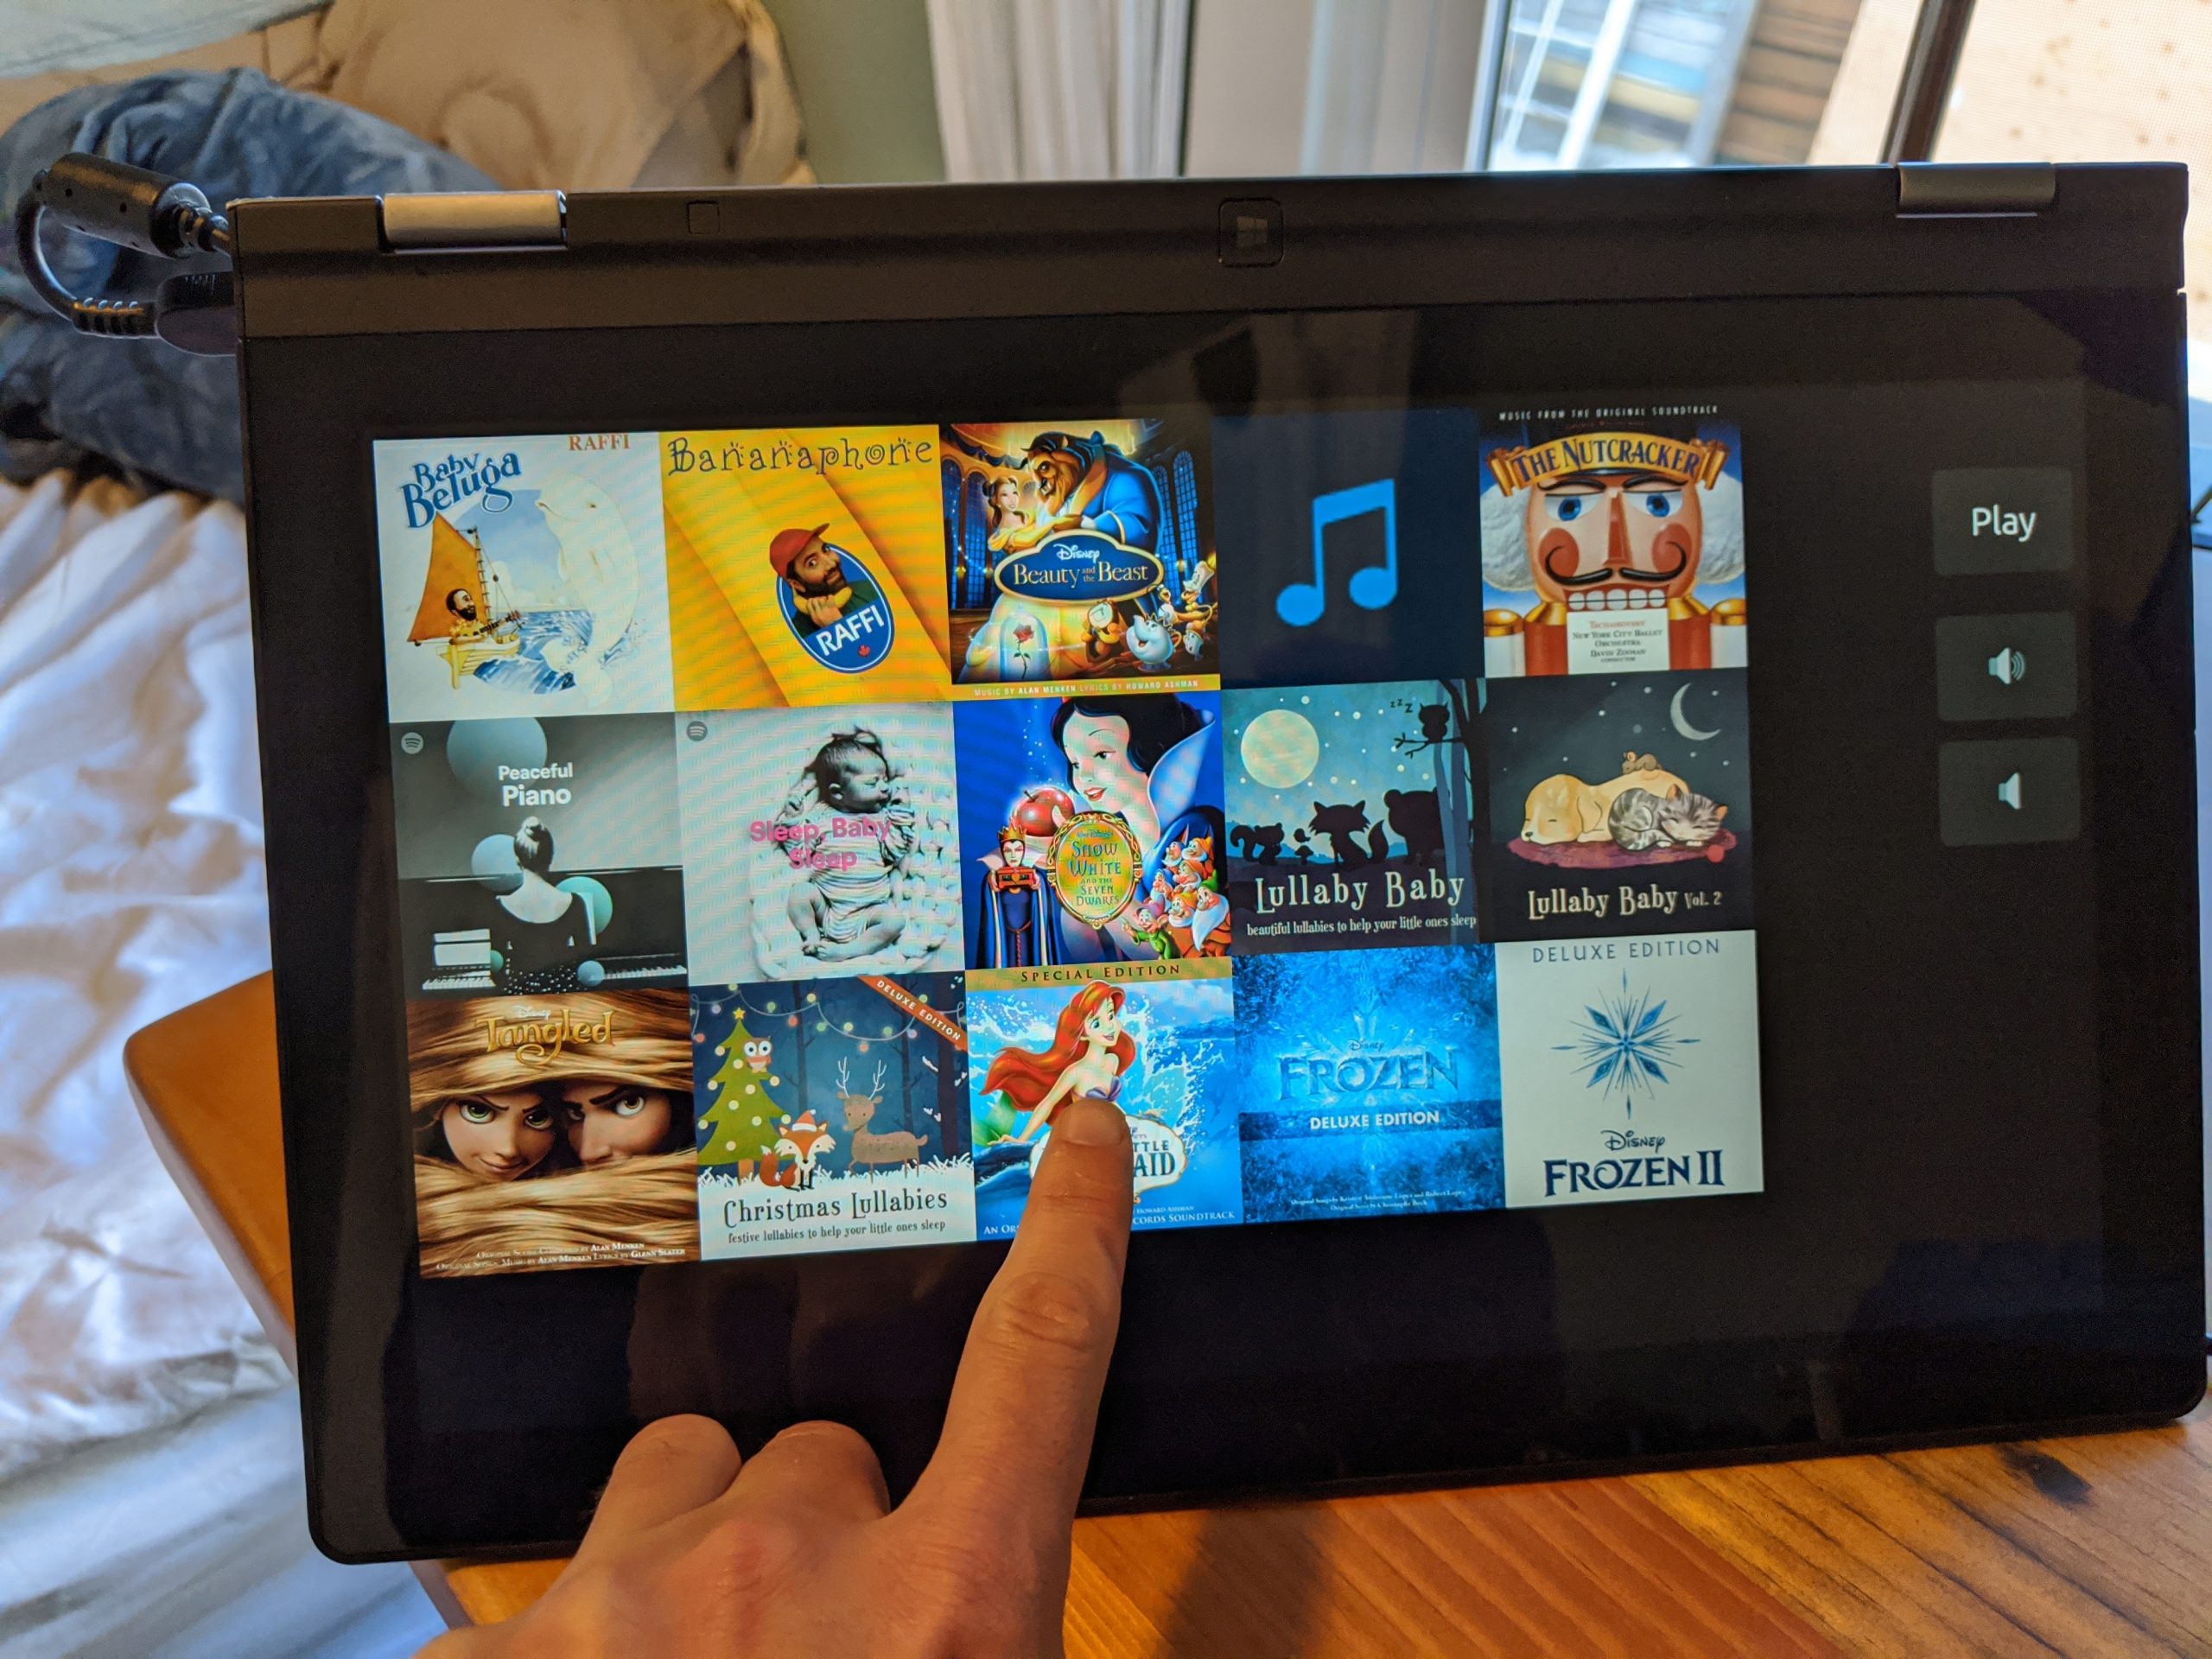 Touchscreen interface for SONOS speaker (for my 3-year-old)